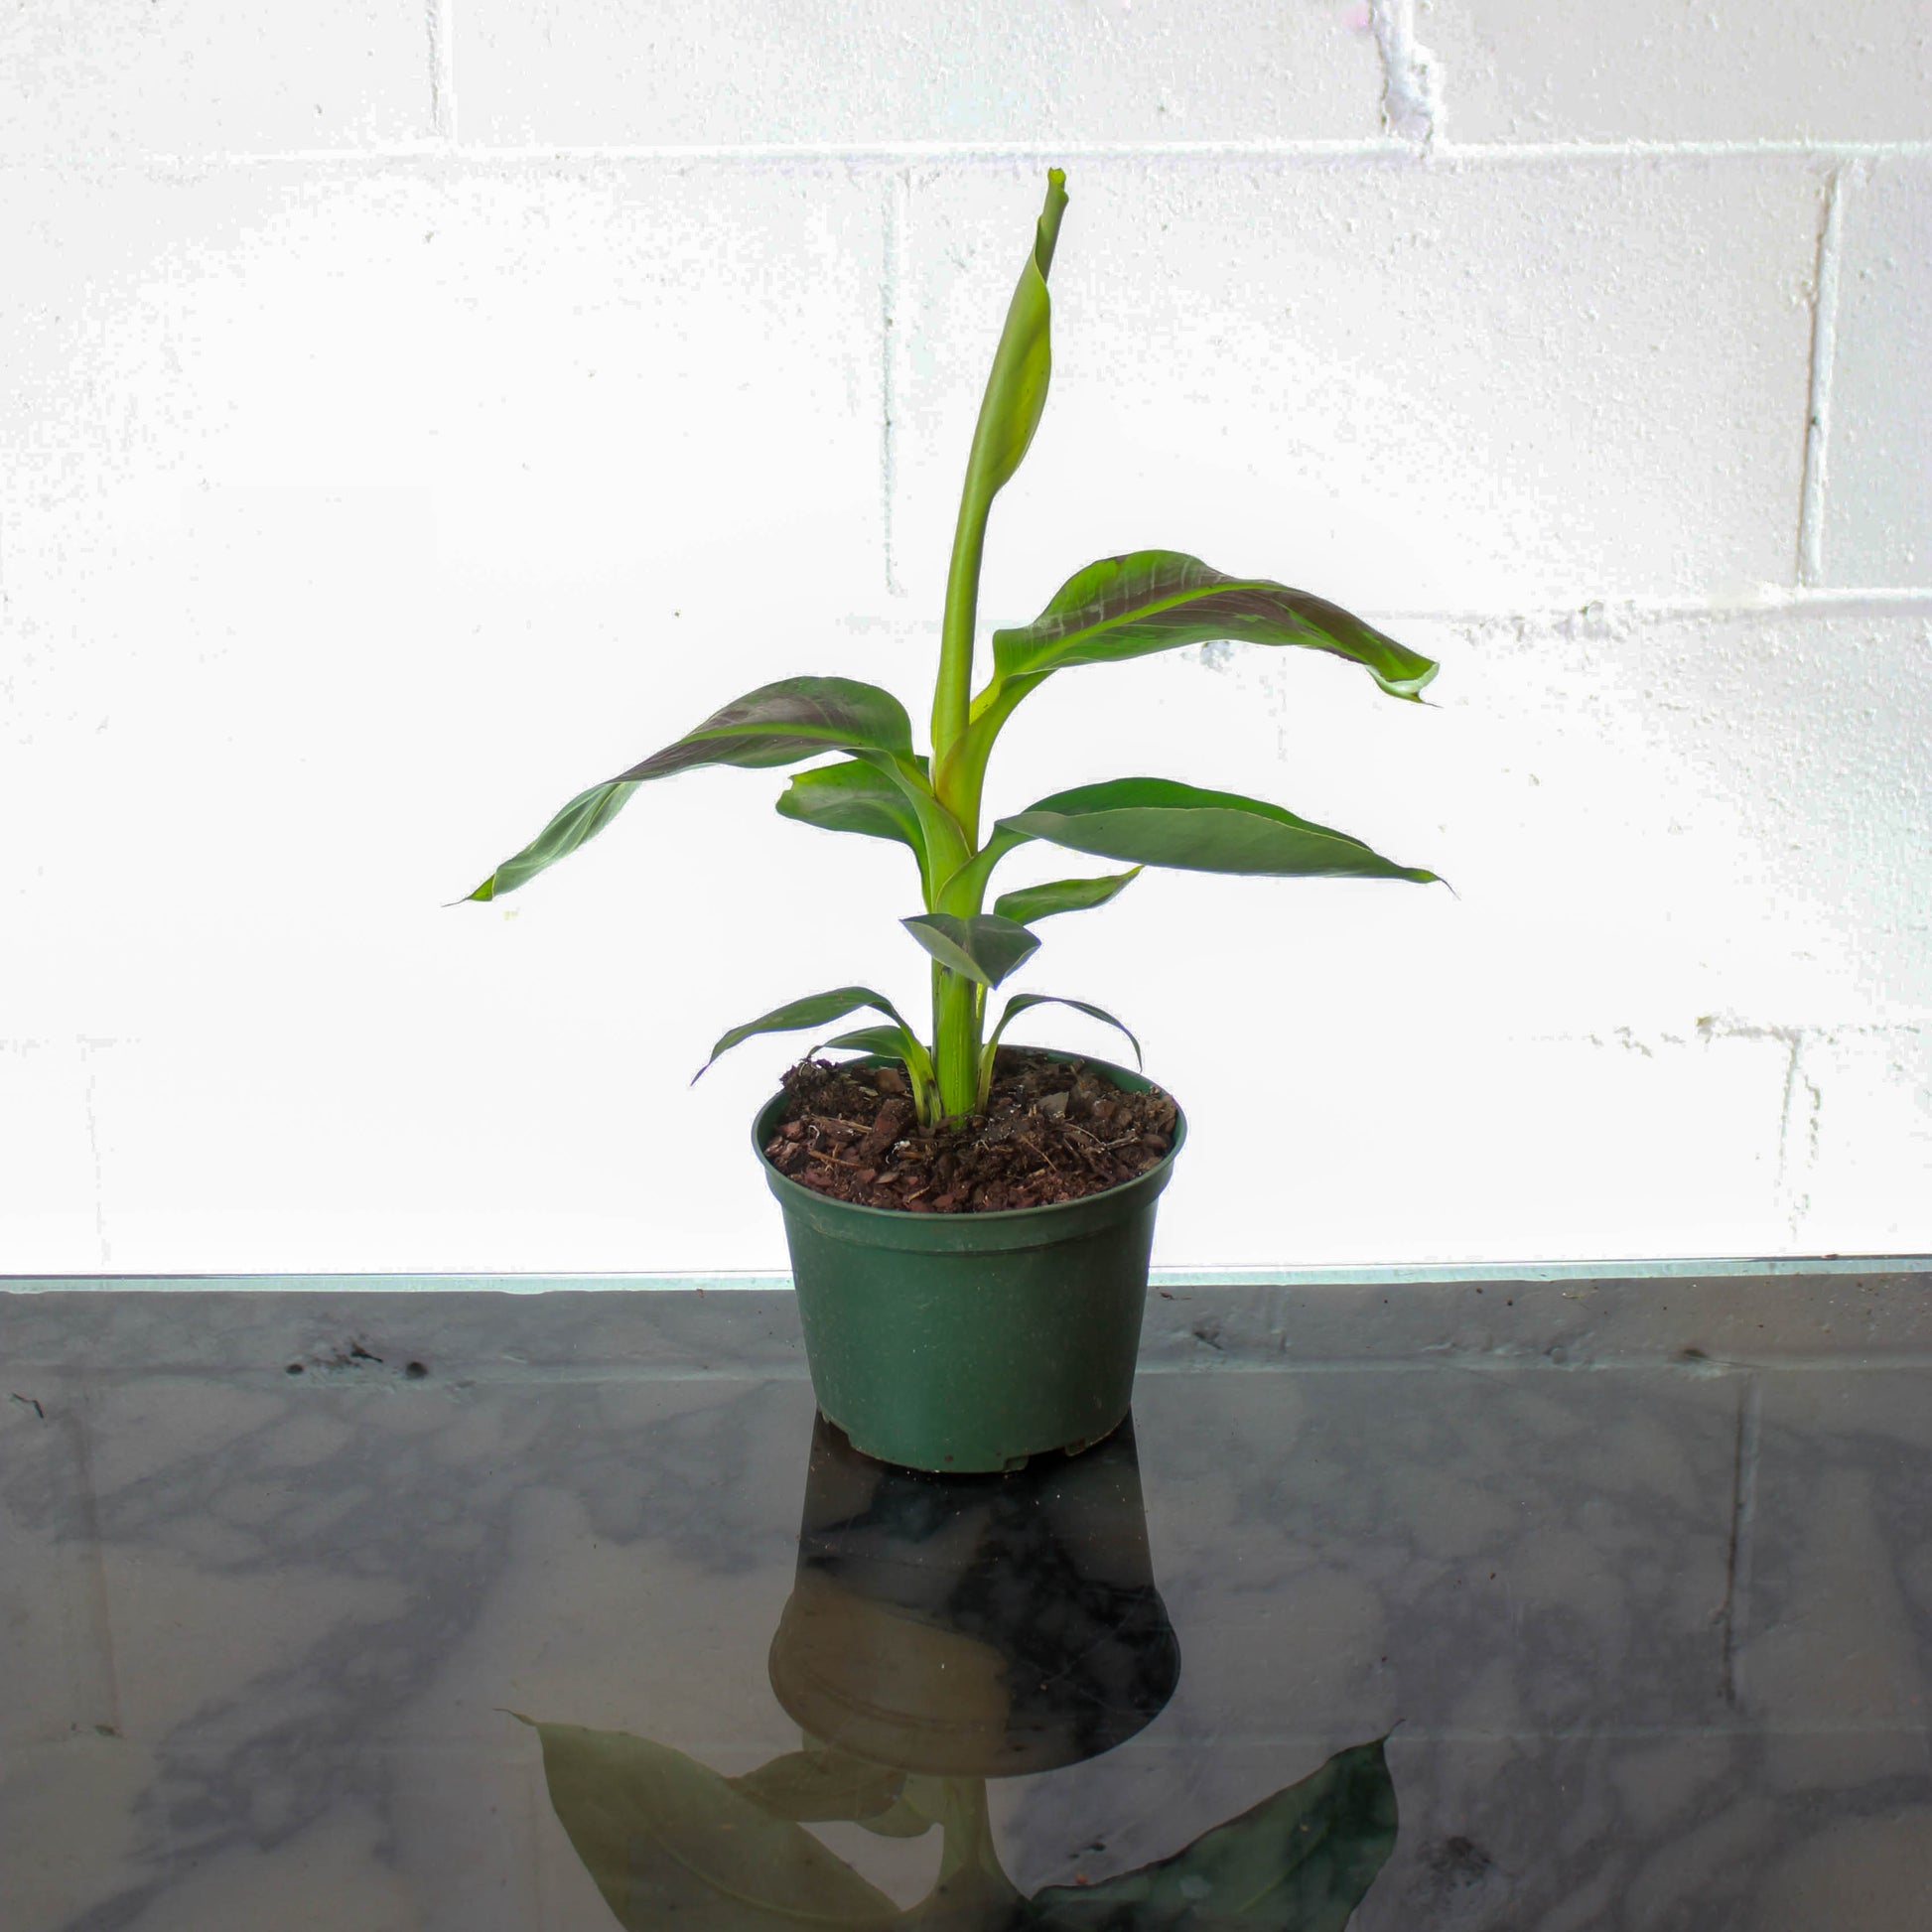 Abyssinian Banana Plant (Ensete ventricosum) in a 6 inch pot. Indoor plant for sale by Promise Supply for delivery and pickup in Toronto